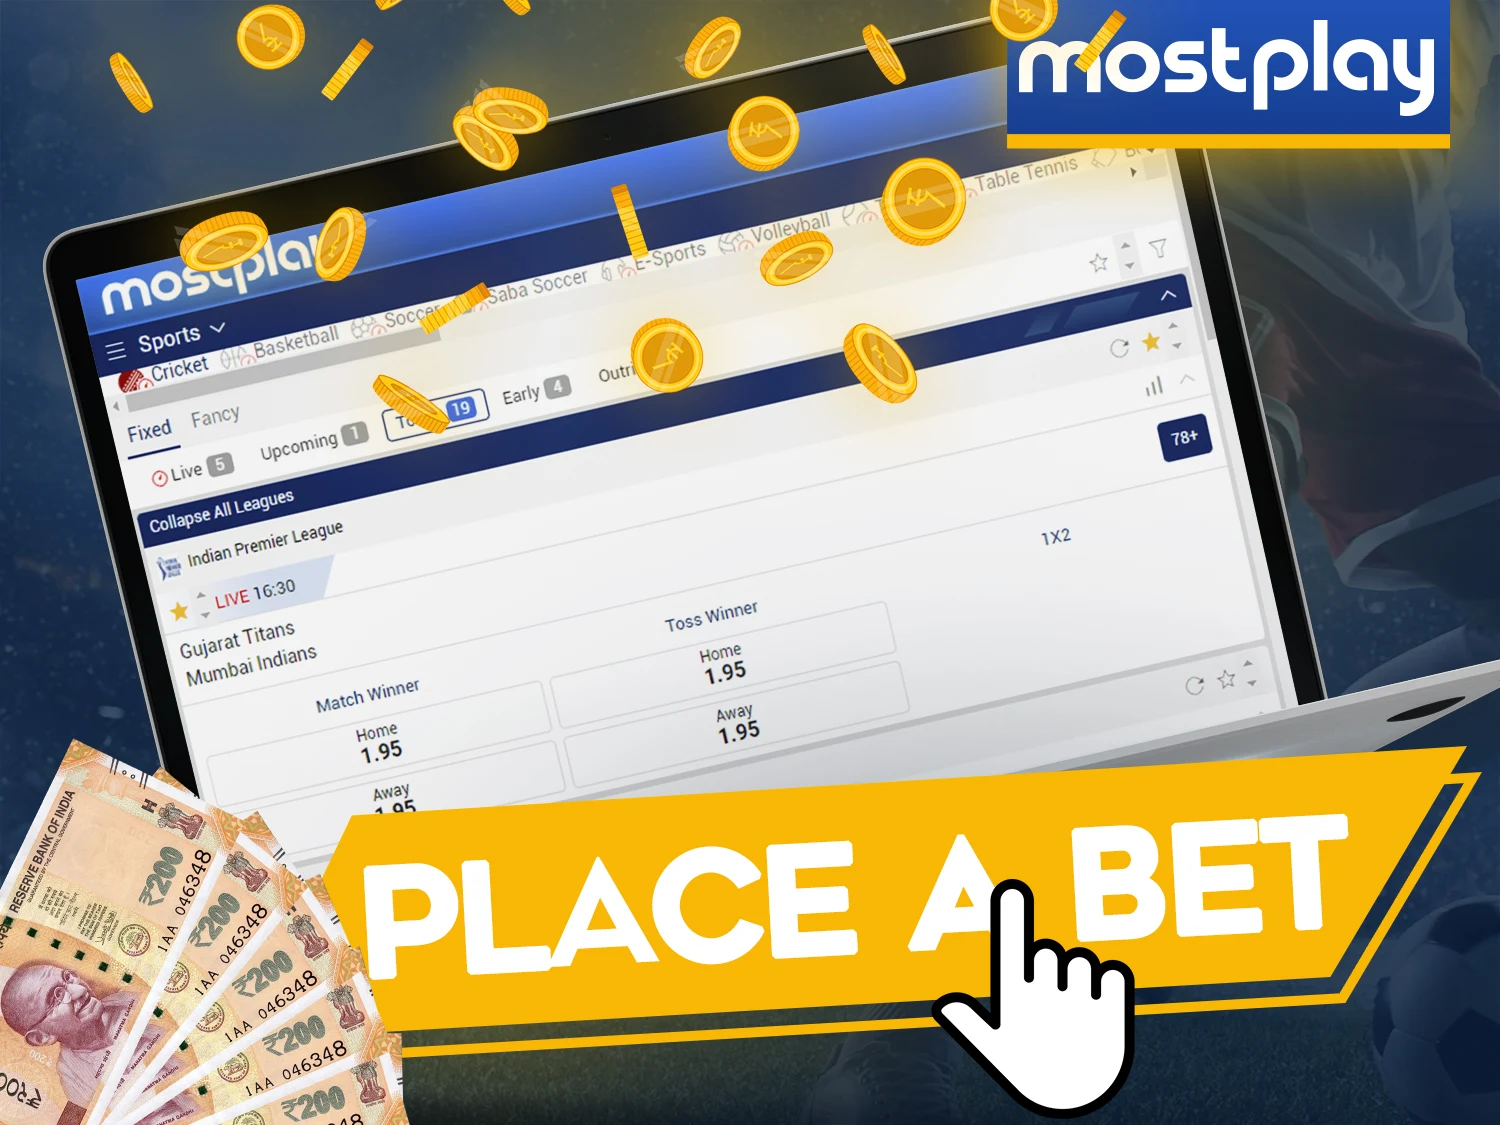 It's easy to place a bet at Mostplay.